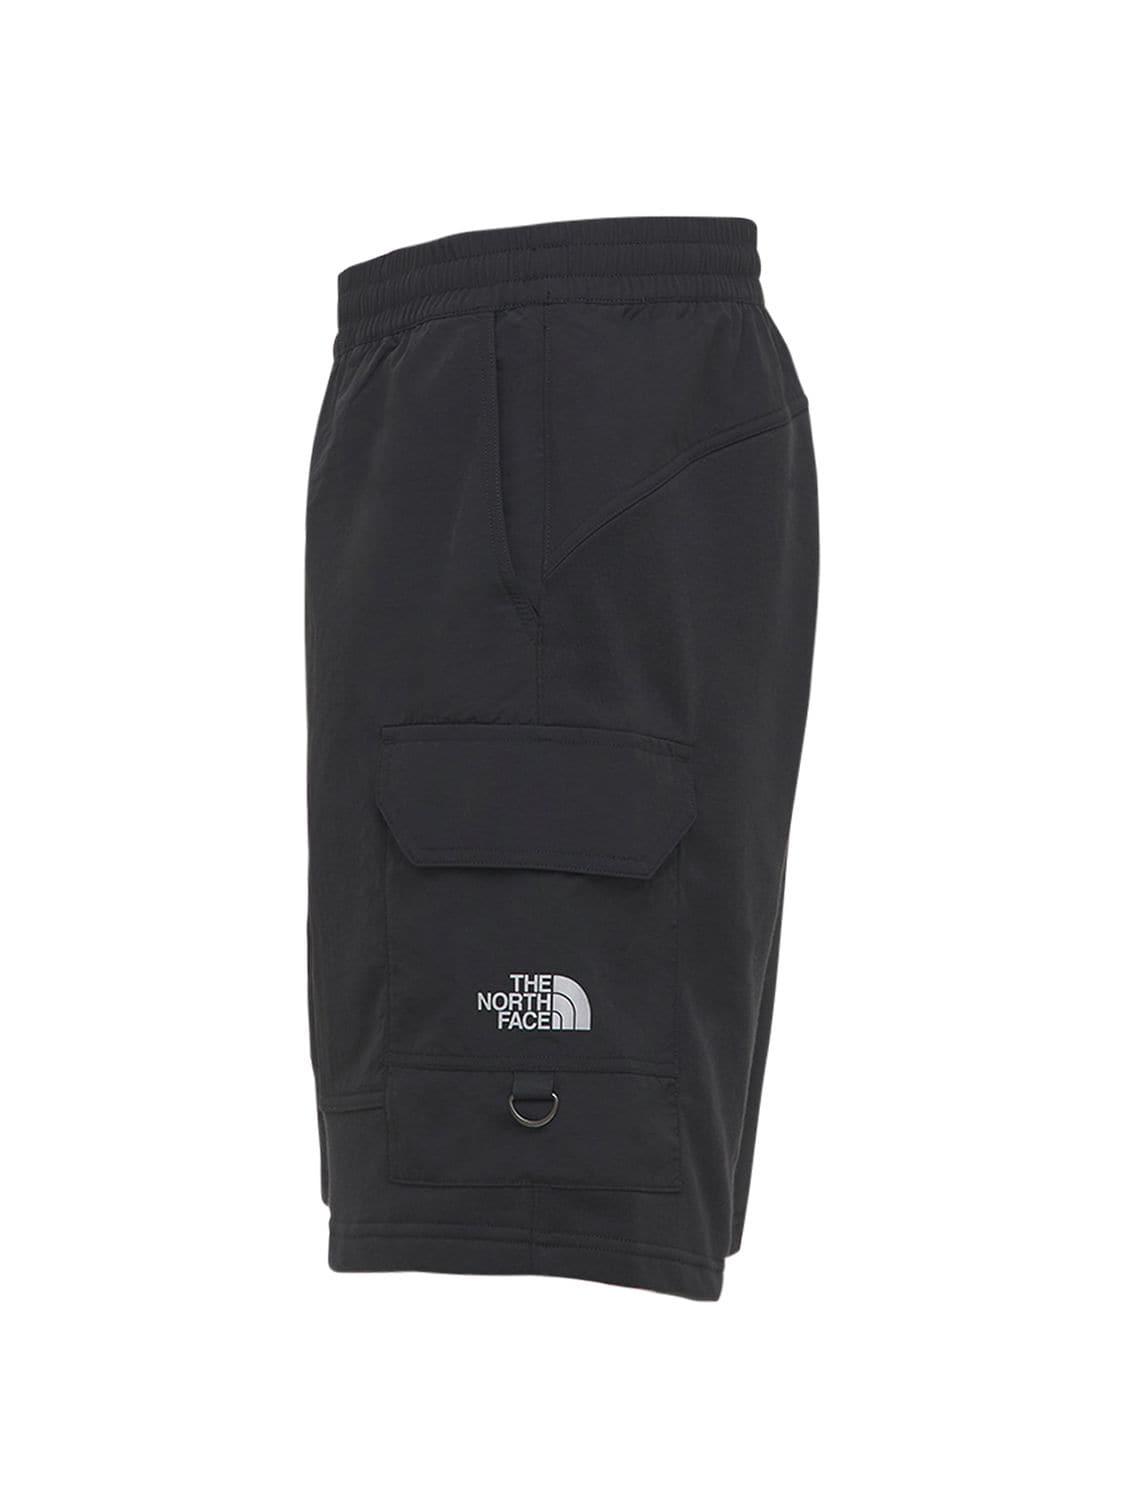 The North Face Steep Tech Light Shorts in Black for Men - Lyst